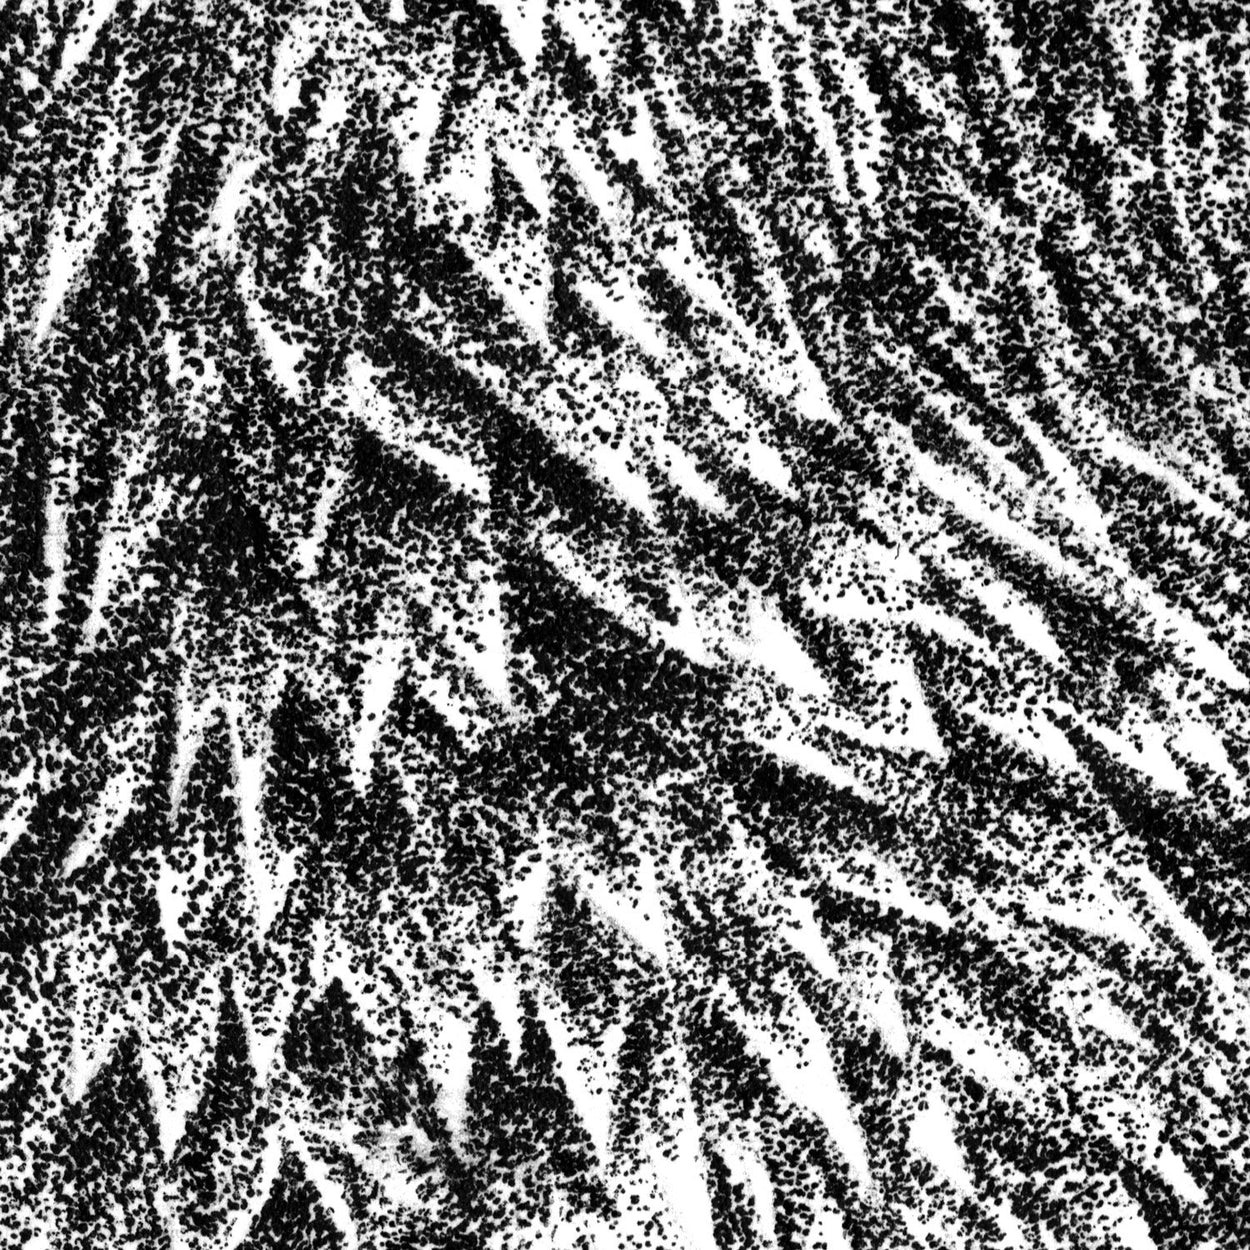 Otter Fur Pen Stippling Drawing - The Thriving Wild